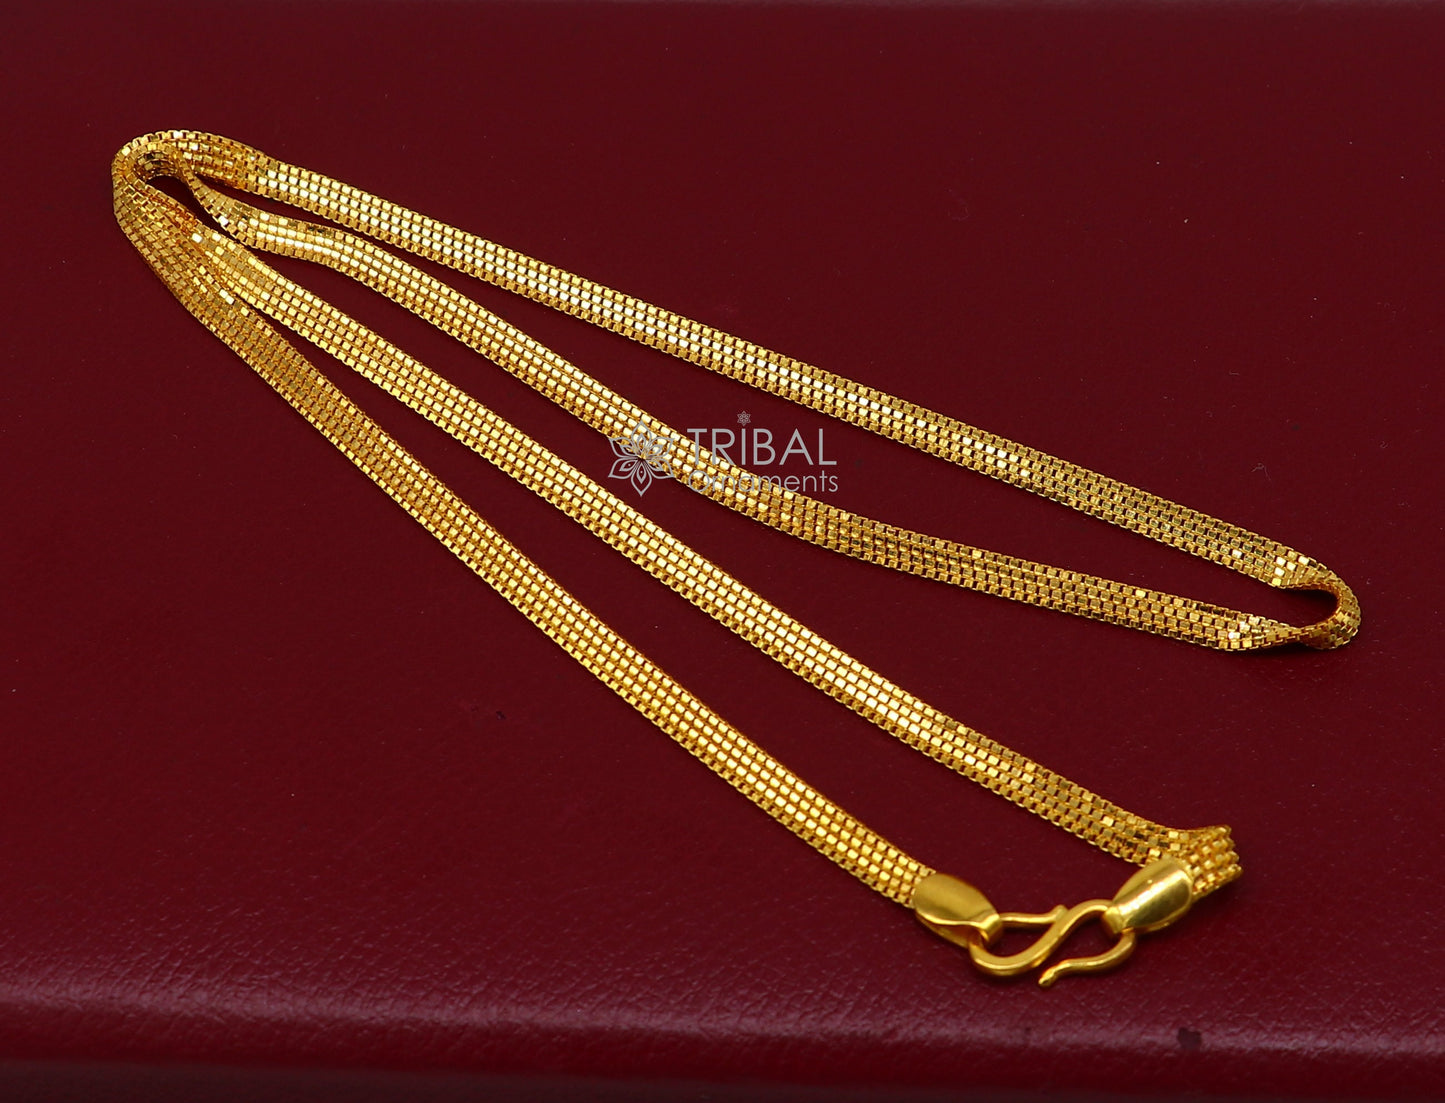 All sizes 22kt yellow gold handmade solid box multiple box customized highway chain necklace royal gifting jewelry from india ch574 - TRIBAL ORNAMENTS